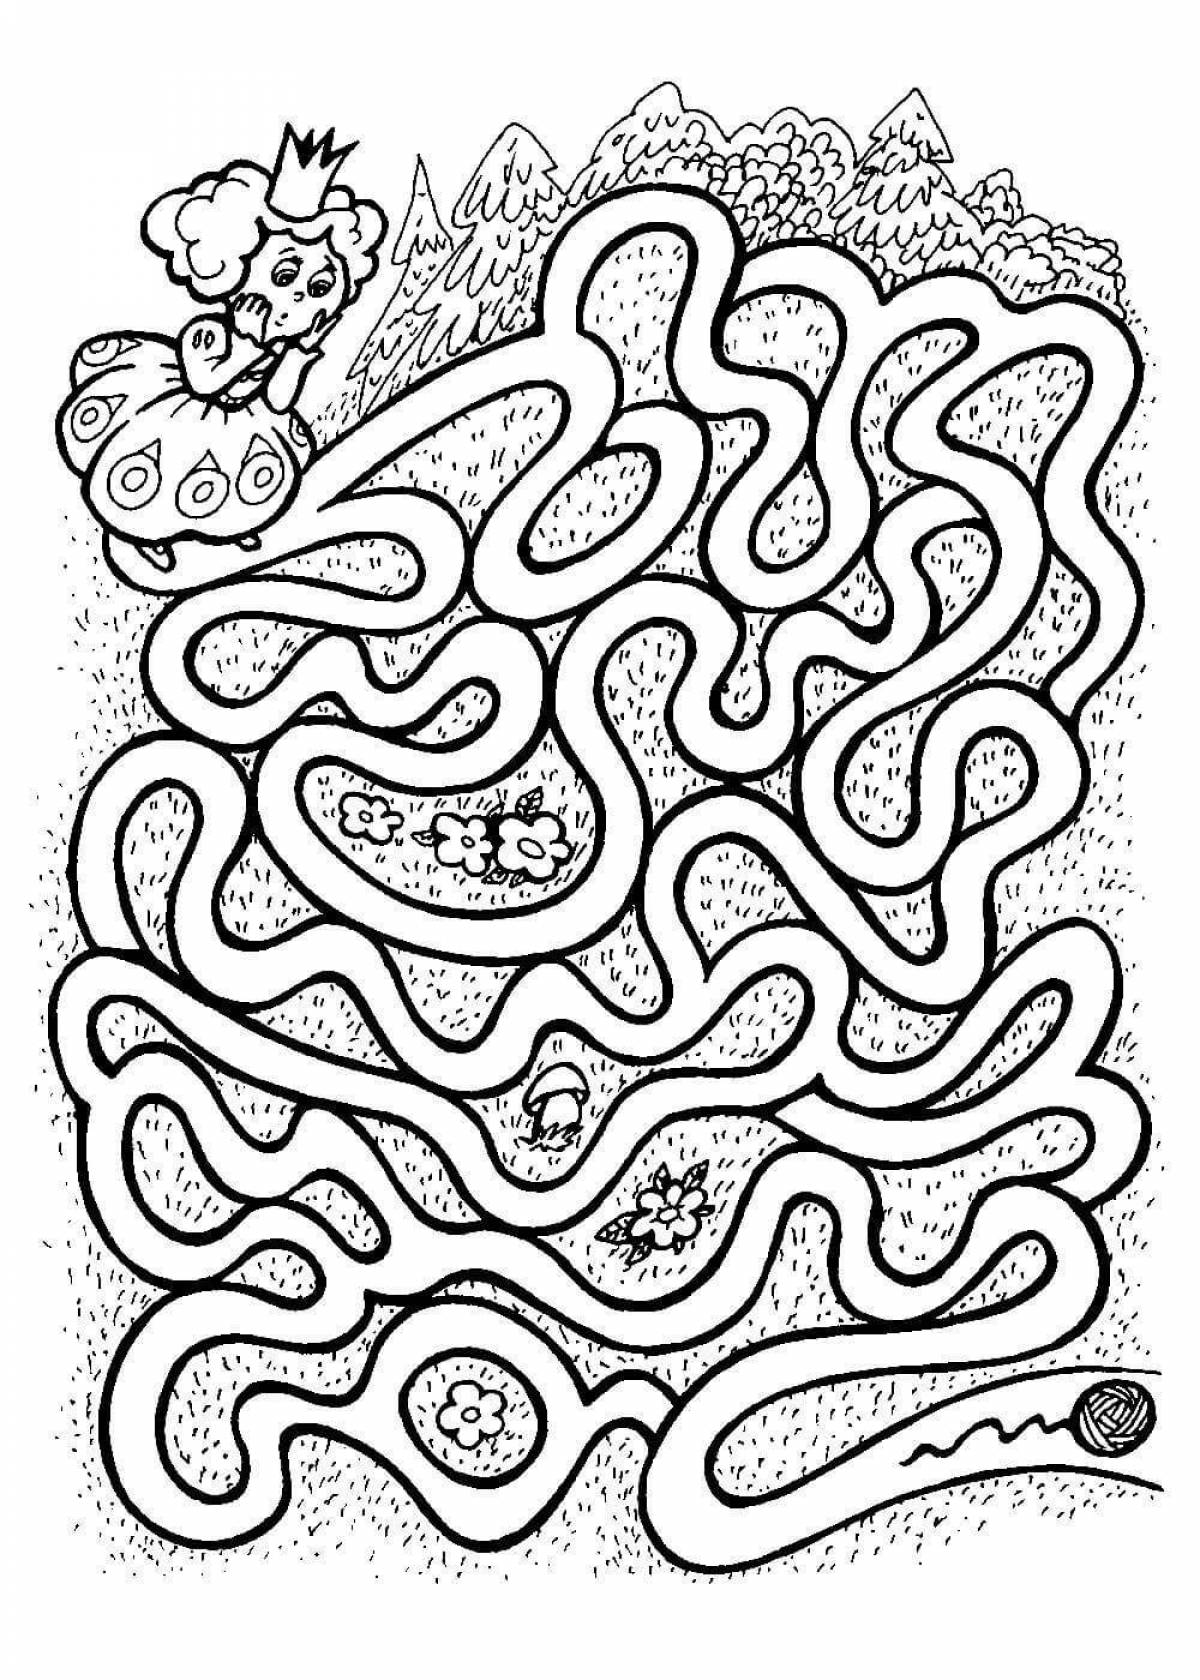 Coloring page funny maze